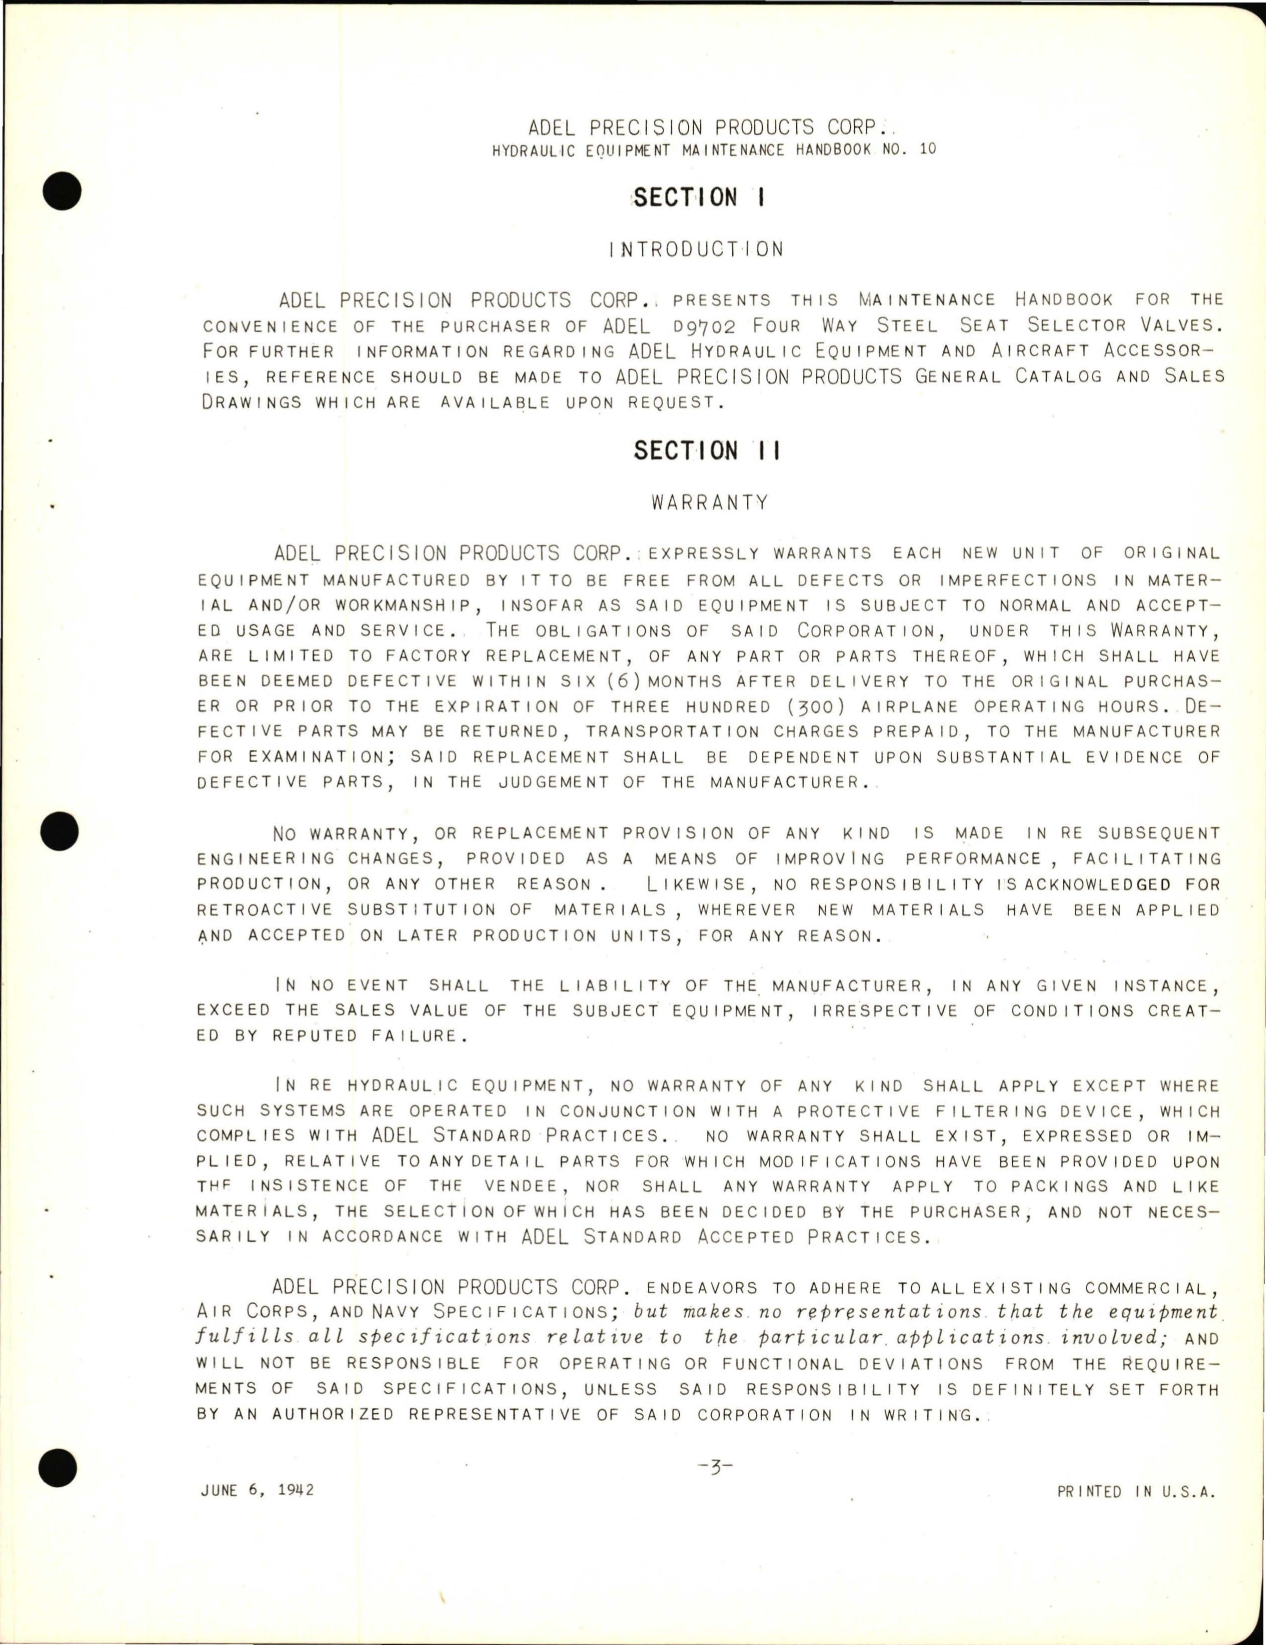 Sample page 7 from AirCorps Library document: Instructions with Parts Catalog for Cowl Flap Valve - D9702